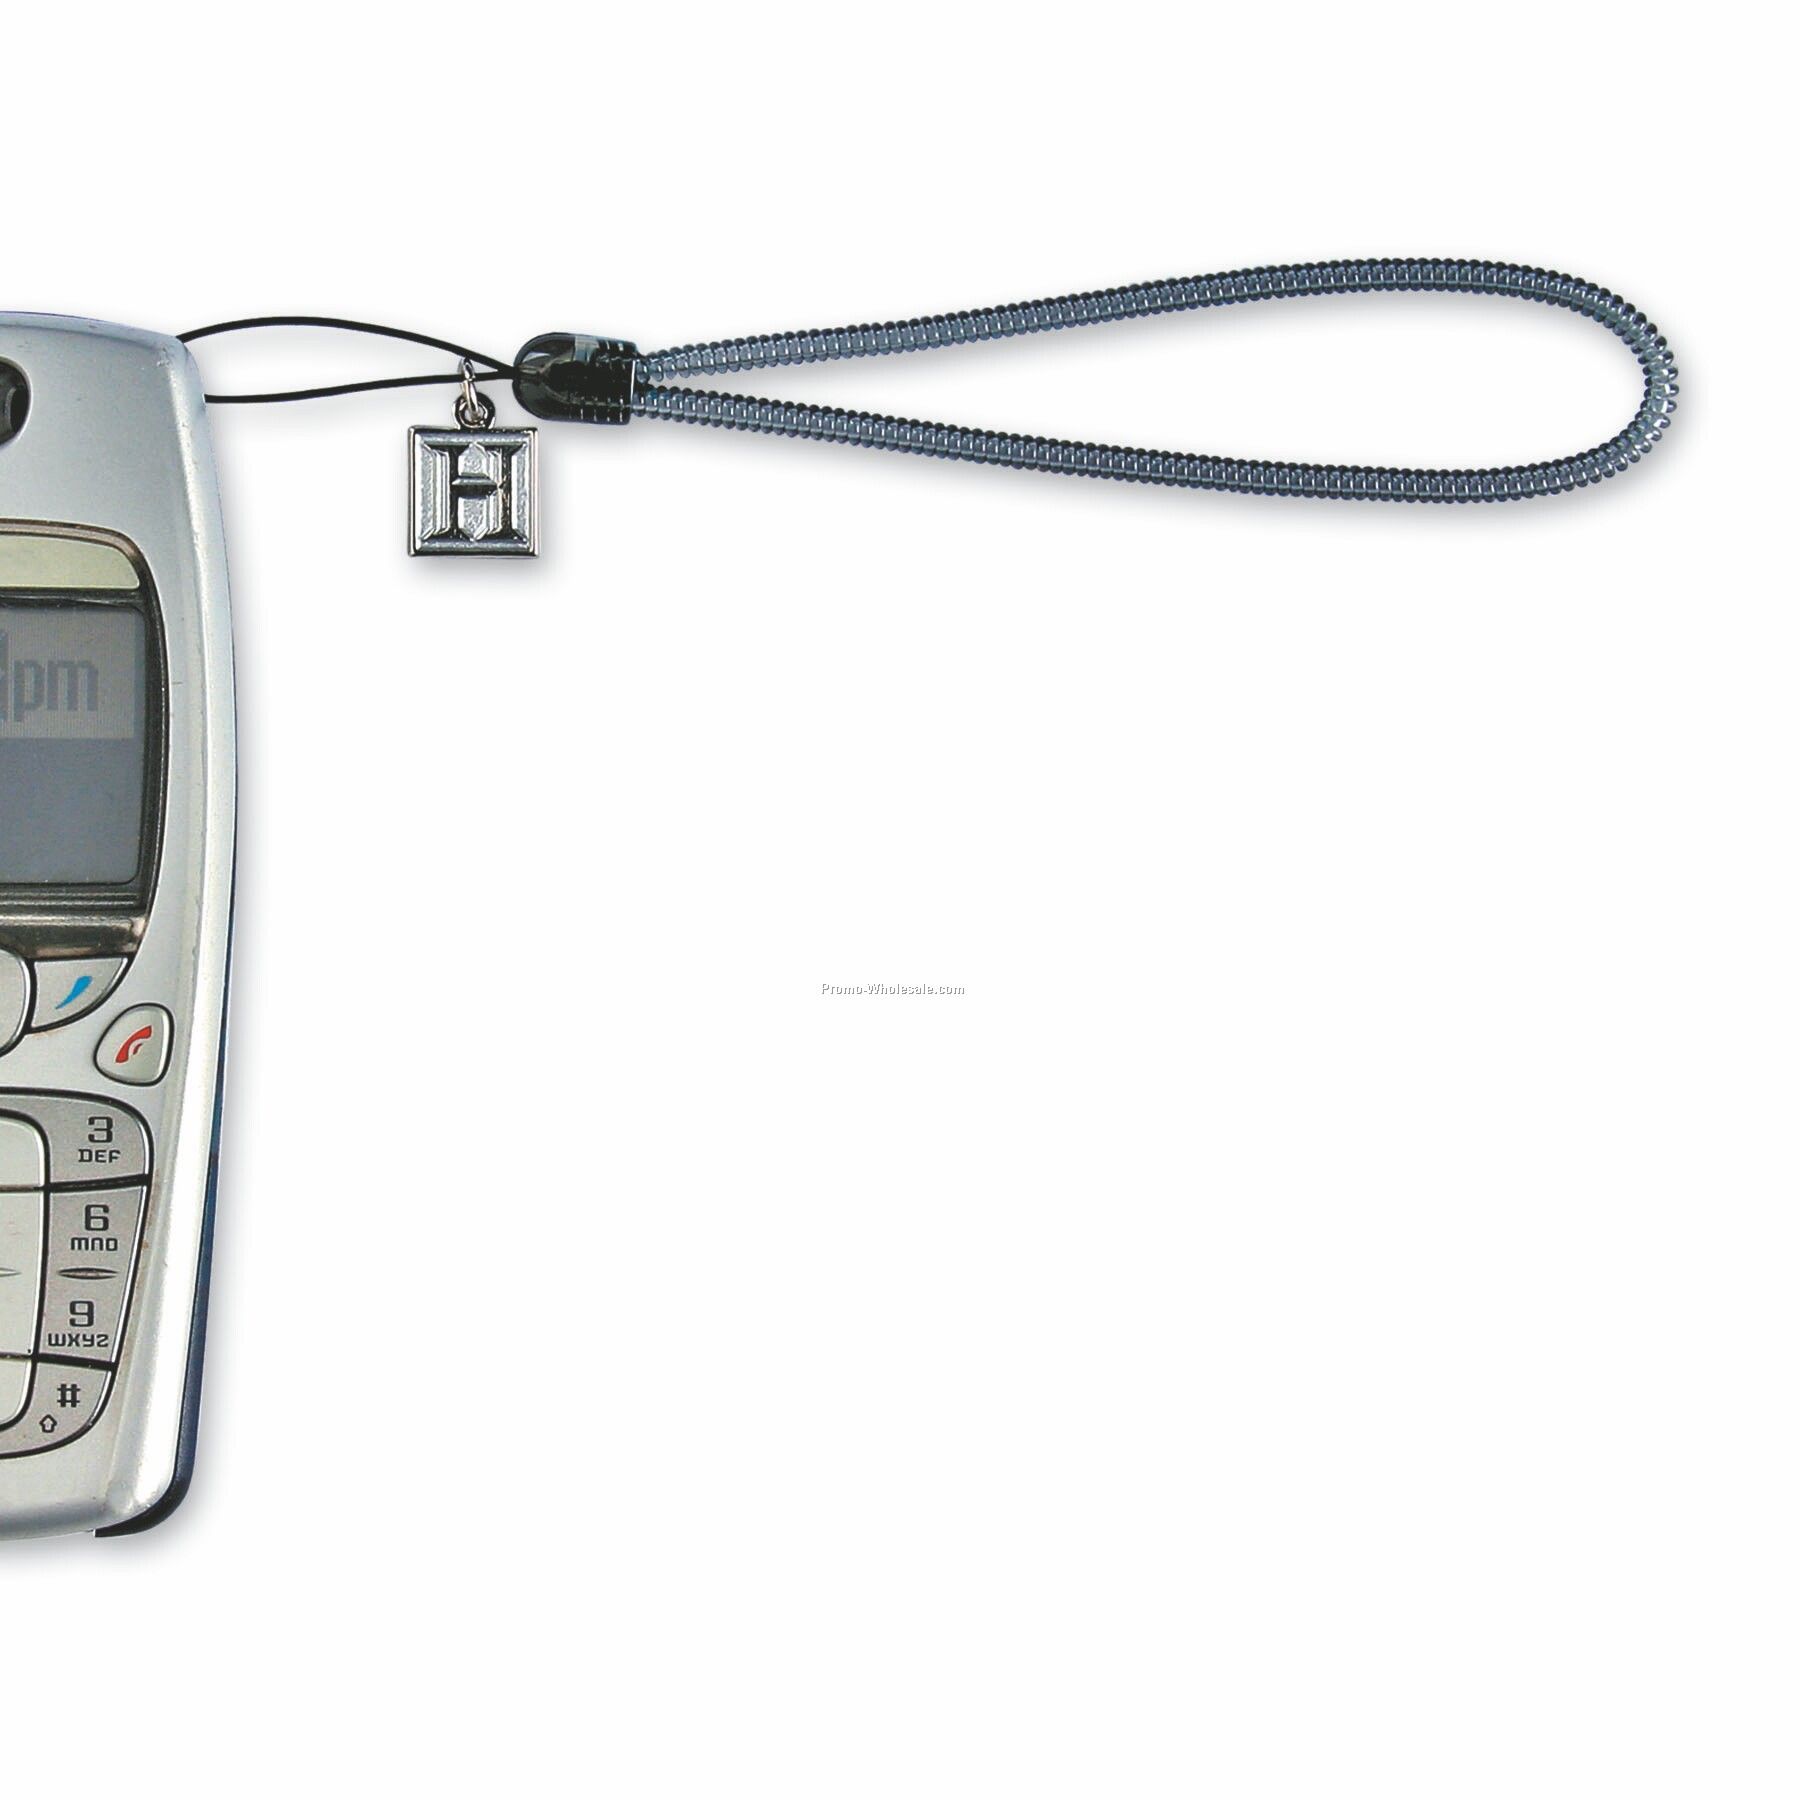 Cnij Cellphone Charm (Up To 1")